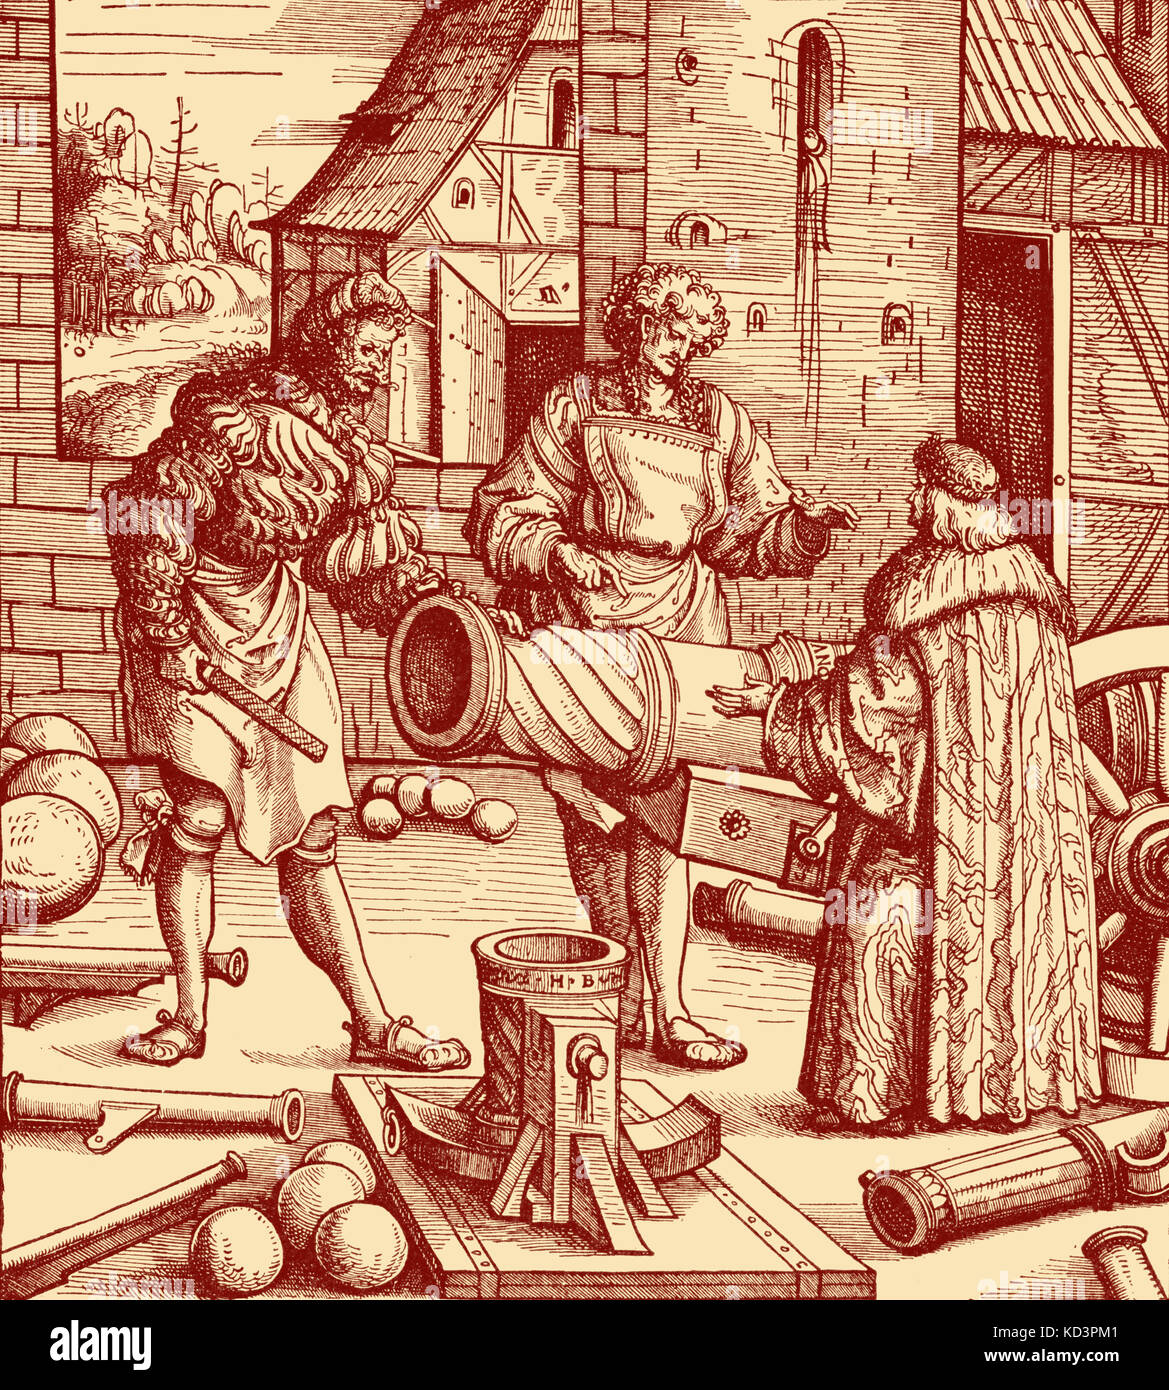 Foundrymen with a Canon. Canon used in Maximilian's army. Woodcut by Hans Burgkmair- 1473 - 1531. Maximilian I of Habsburg , Holy Roman Emperor - 22 March  1459 – 12 January 12 1519. Stock Photo